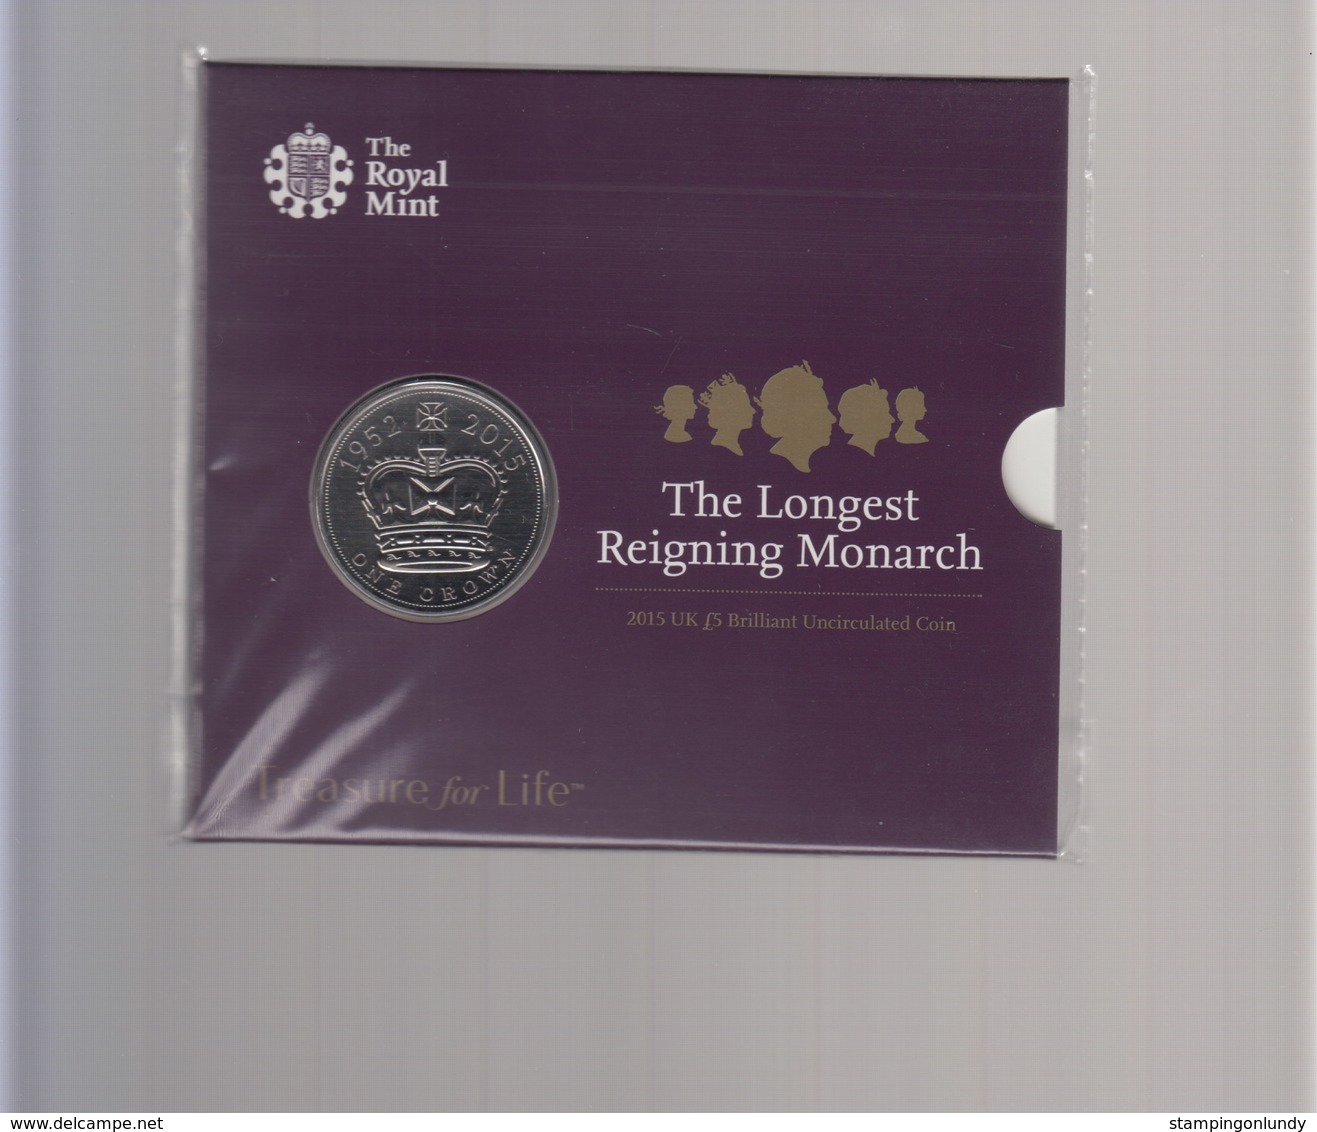 AB1669. The Royal Mint One Crown Coin £5 1952-2015 The Longest Reigning Monarch - 5 Pounds